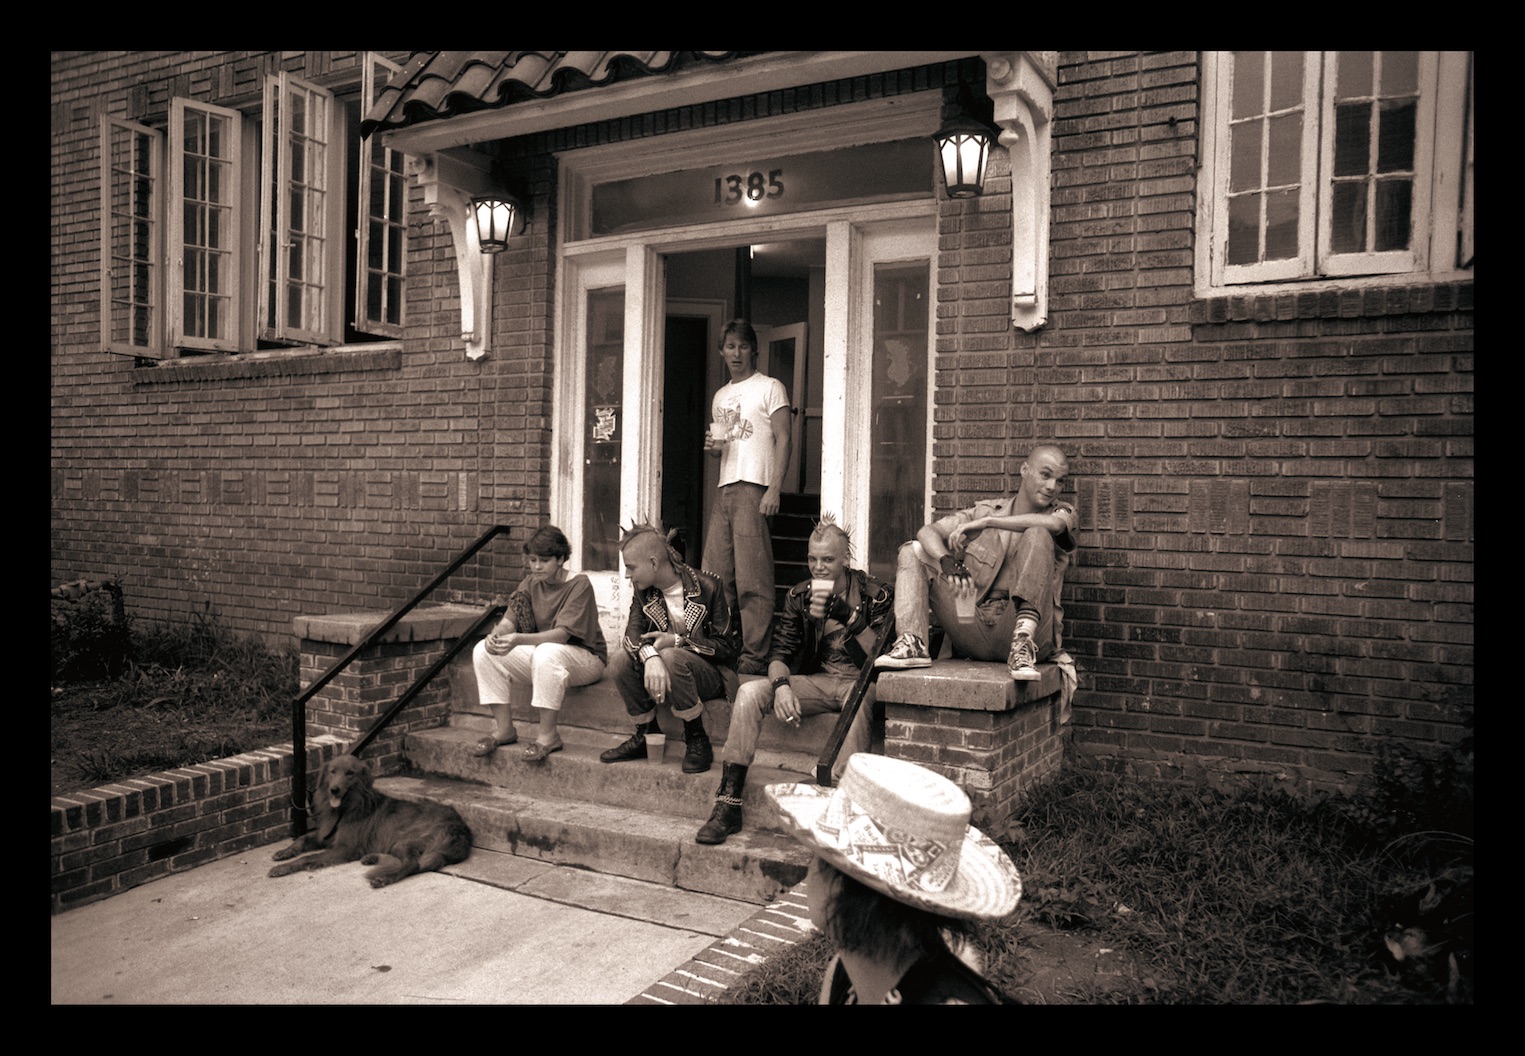 A black and white photo of four individuals sitting on the steps outside a brick building.